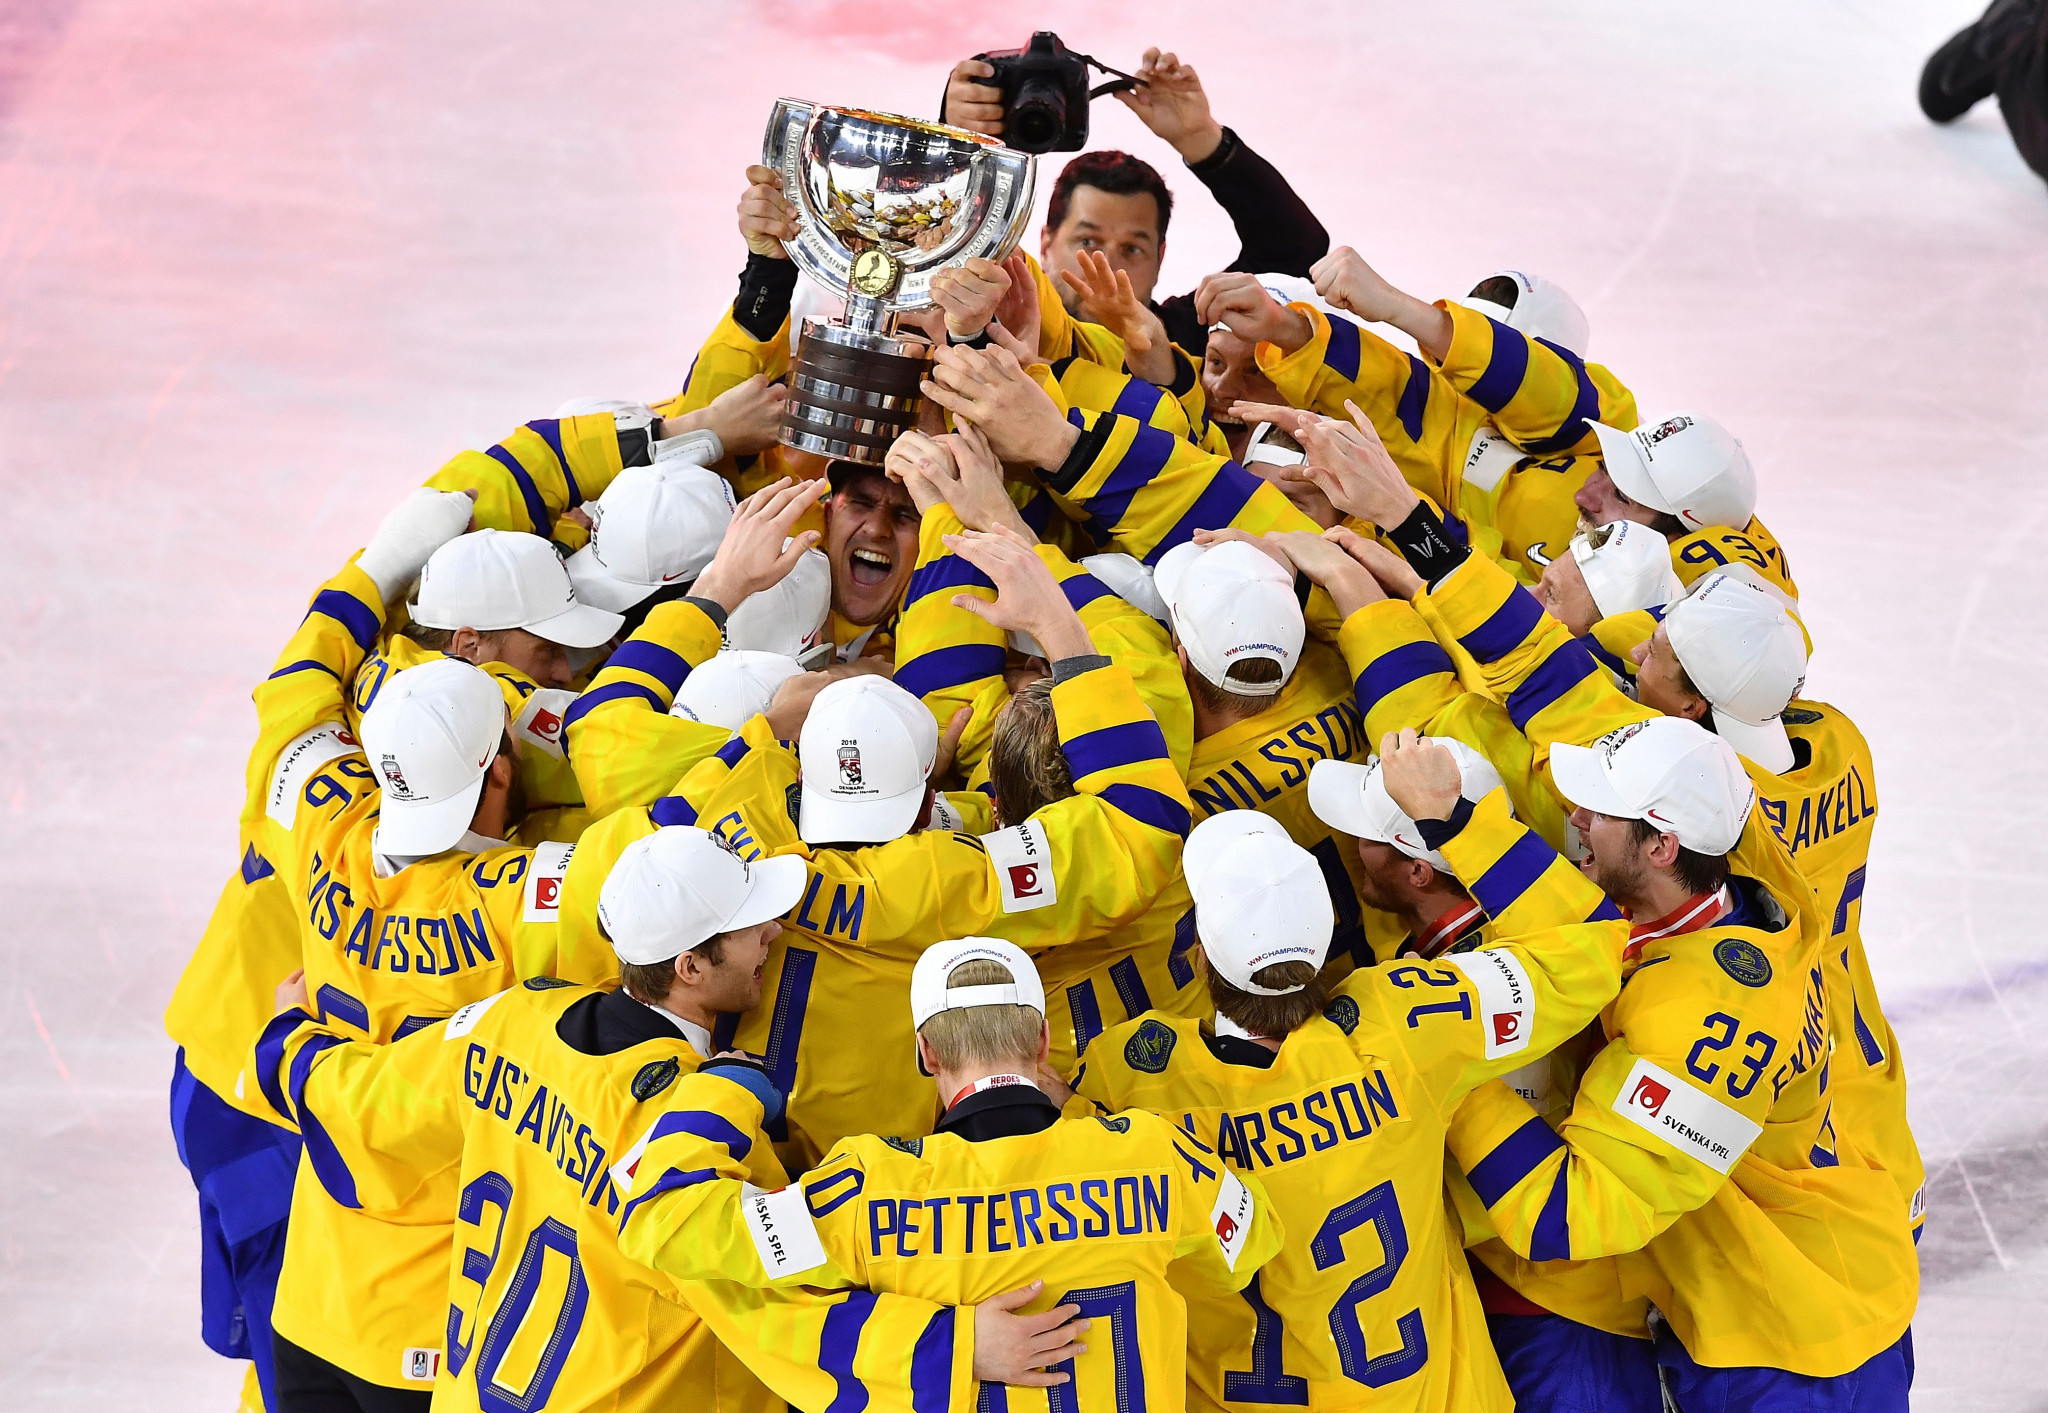 Sweden defended their World Championship title ©Getty Images